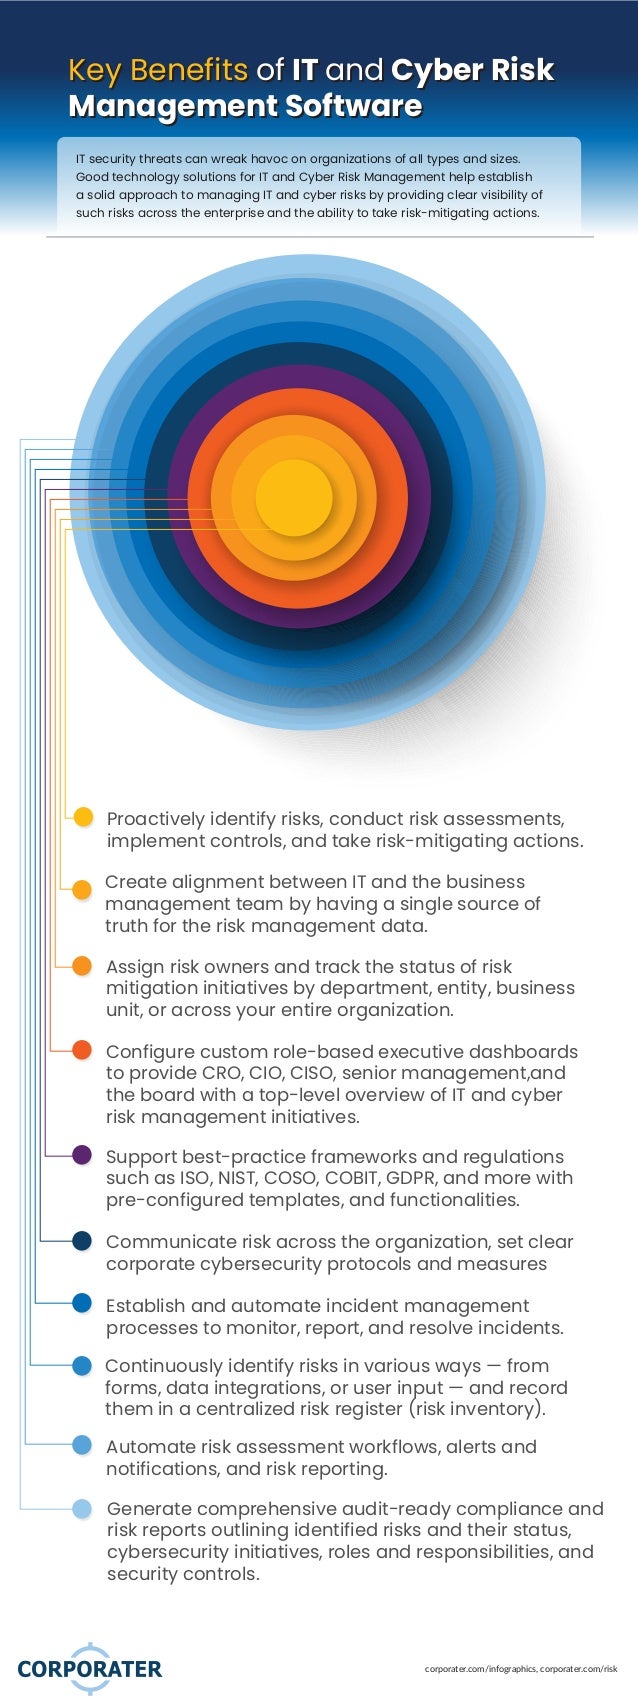 corporater.com/infographics, corporater.com/risk
Key Benefits of IT and Cyber Risk
Management Software
Key Benefits of IT and Cyber Risk
Management Software
IT security threats can wreak havoc on organizations of all types and sizes.
Good technology solutions for IT and Cyber Risk Management help establish
a solid approach to managing IT and cyber risks by providing clear visibility of
such risks across the enterprise and the ability to take risk-mitigating actions.
Configure custom role-based executive dashboards
to provide CRO, CIO, CISO, senior management,and
the board with a top-level overview of IT and cyber
risk management initiatives.
Proactively identify risks, conduct risk assessments,
implement controls, and take risk-mitigating actions.
Create alignment between IT and the business
management team by having a single source of
truth for the risk management data.
Assign risk owners and track the status of risk
mitigation initiatives by department, entity, business
unit, or across your entire organization.
Support best-practice frameworks and regulations
such as ISO, NIST, COSO, COBIT, GDPR, and more with
pre-configured templates, and functionalities.
Automate risk assessment workflows, alerts and
notifications, and risk reporting.
Generate comprehensive audit-ready compliance and
risk reports outlining identified risks and their status,
cybersecurity initiatives, roles and responsibilities, and
security controls.
Continuously identify risks in various ways — from
forms, data integrations, or user input — and record
them in a centralized risk register (risk inventory).
Establish and automate incident management
processes to monitor, report, and resolve incidents.
Communicate risk across the organization, set clear
corporate cybersecurity protocols and measures
 